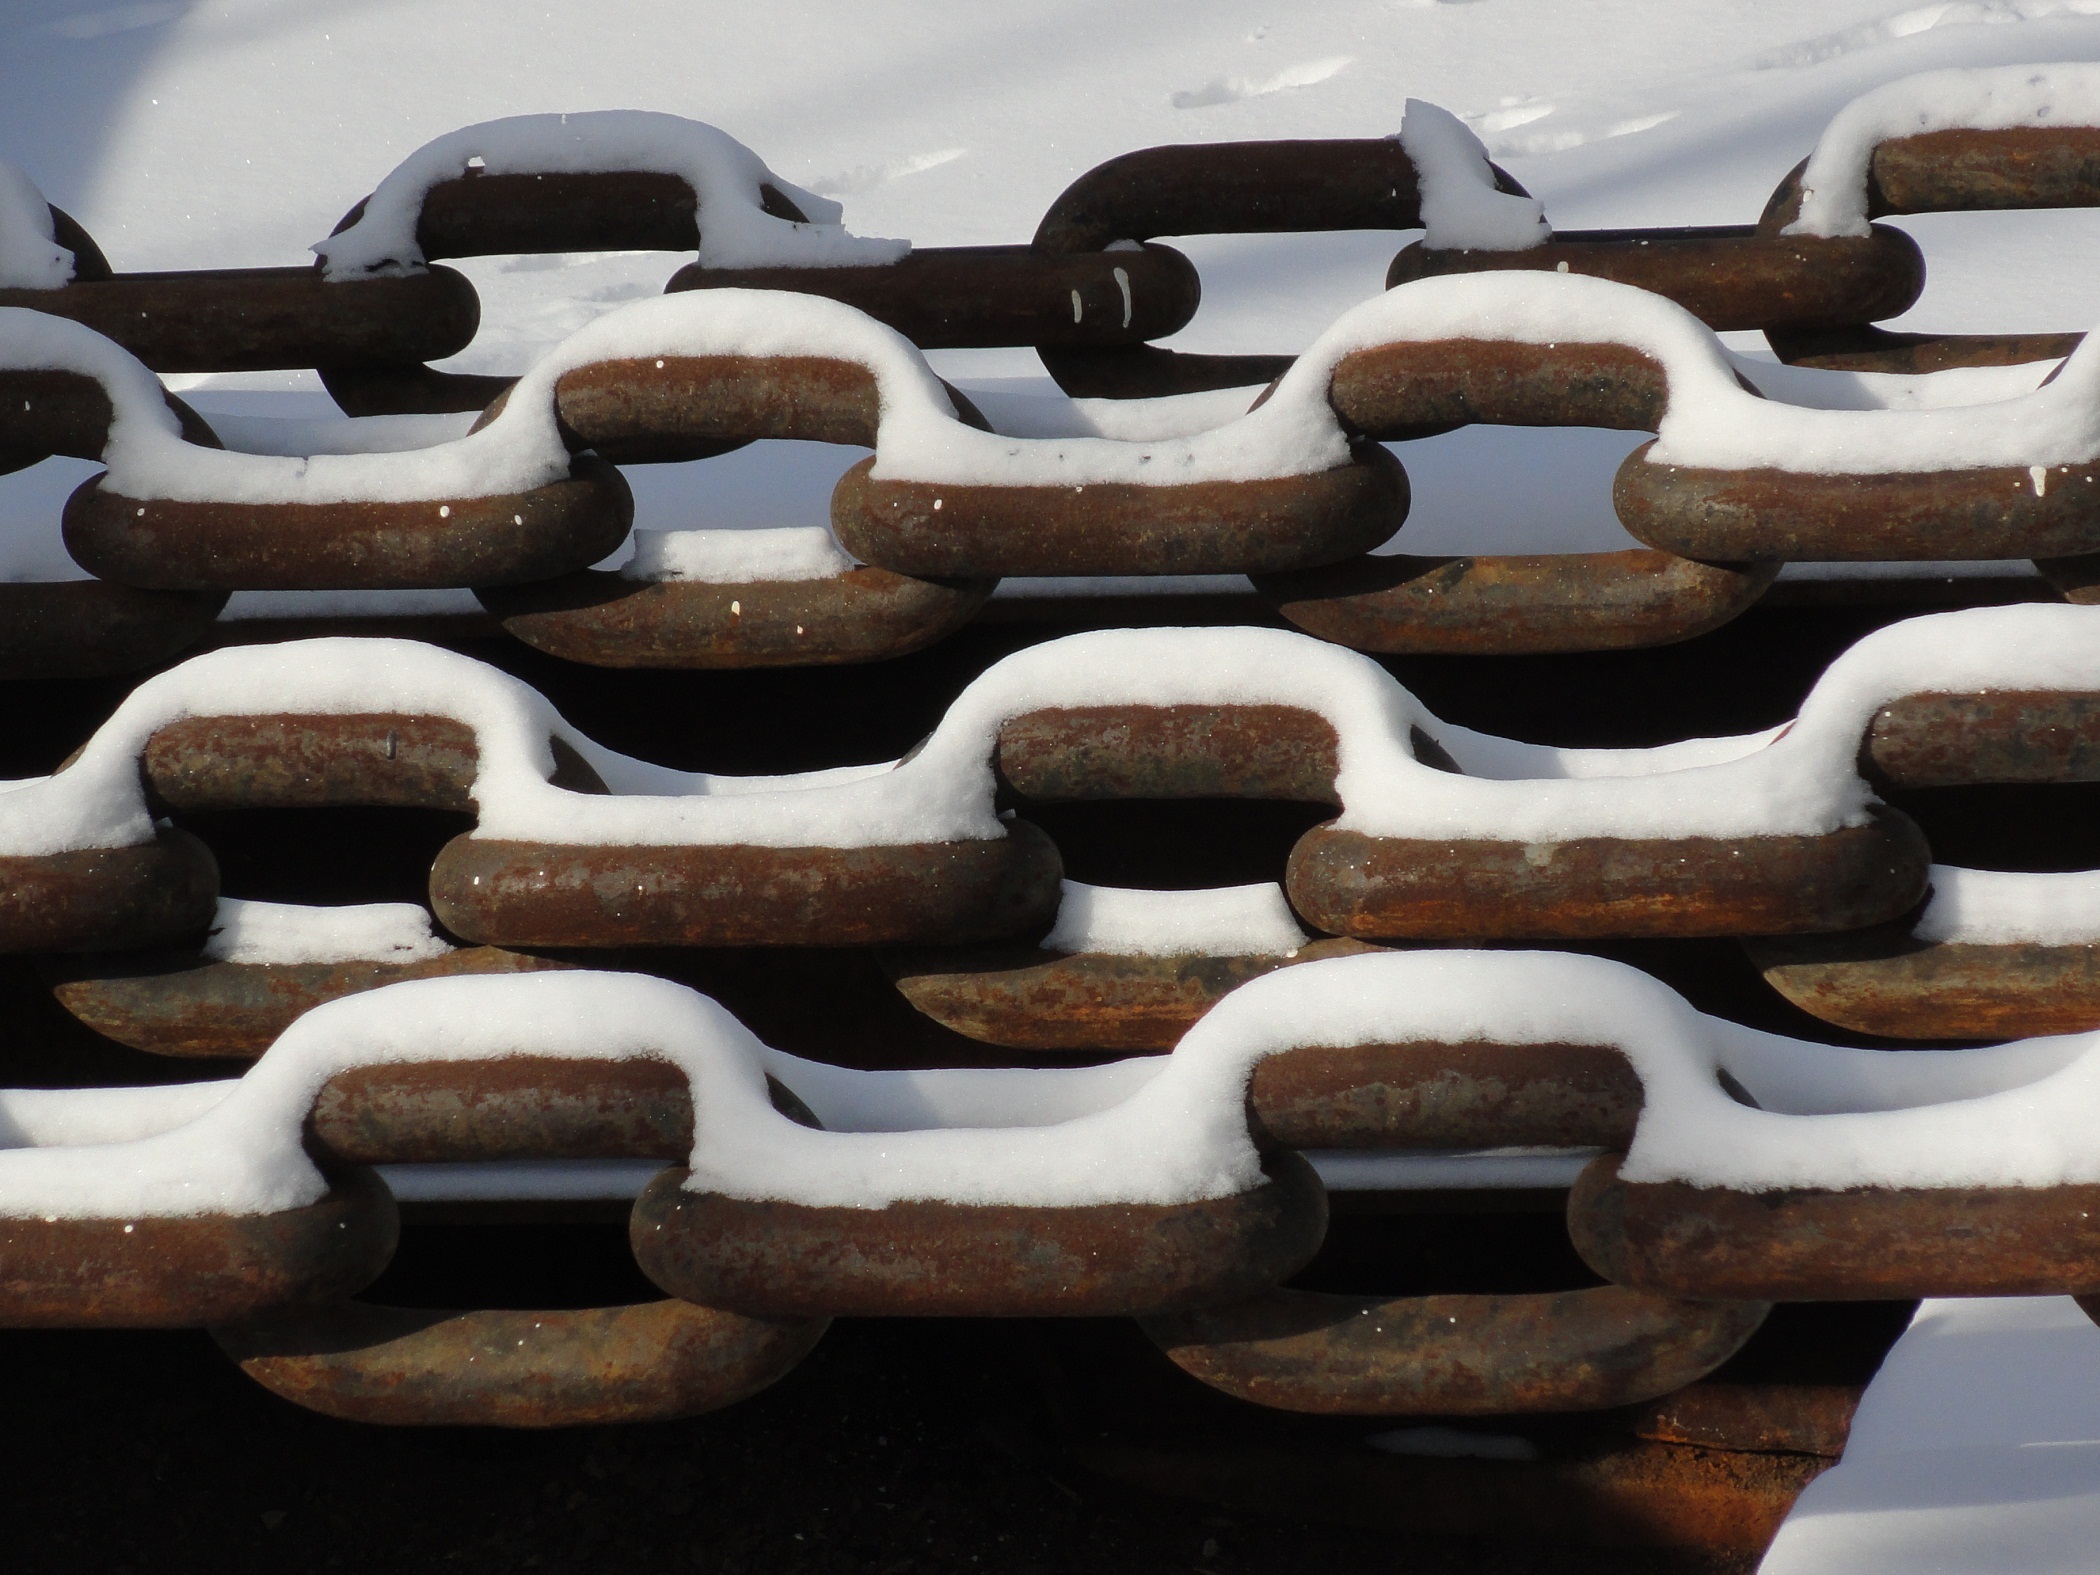 Chains holding Drydock in Fitzgerald Shipyard (user submitted)